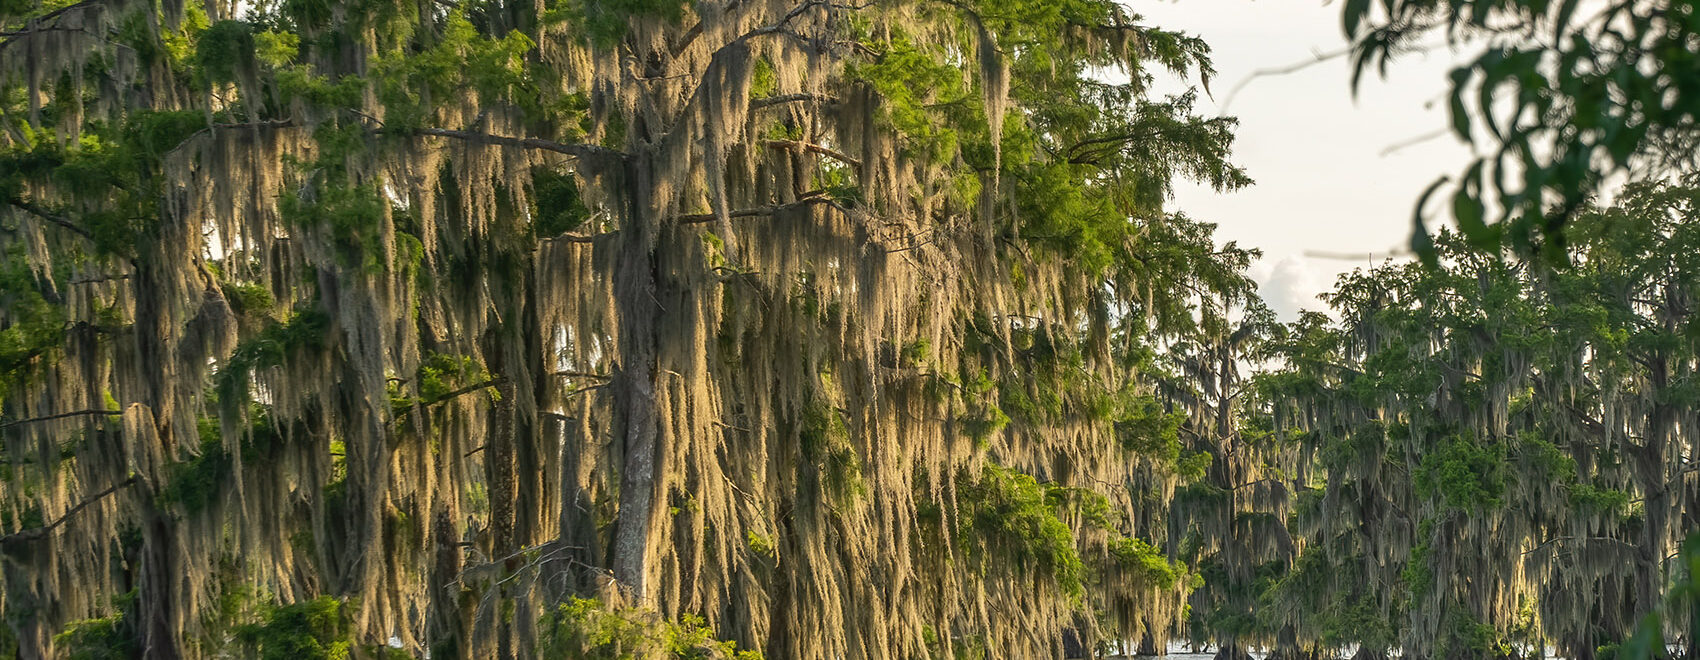 Lake_Martin_The_Nature_Conservancy_Cypress_Trees_and moss